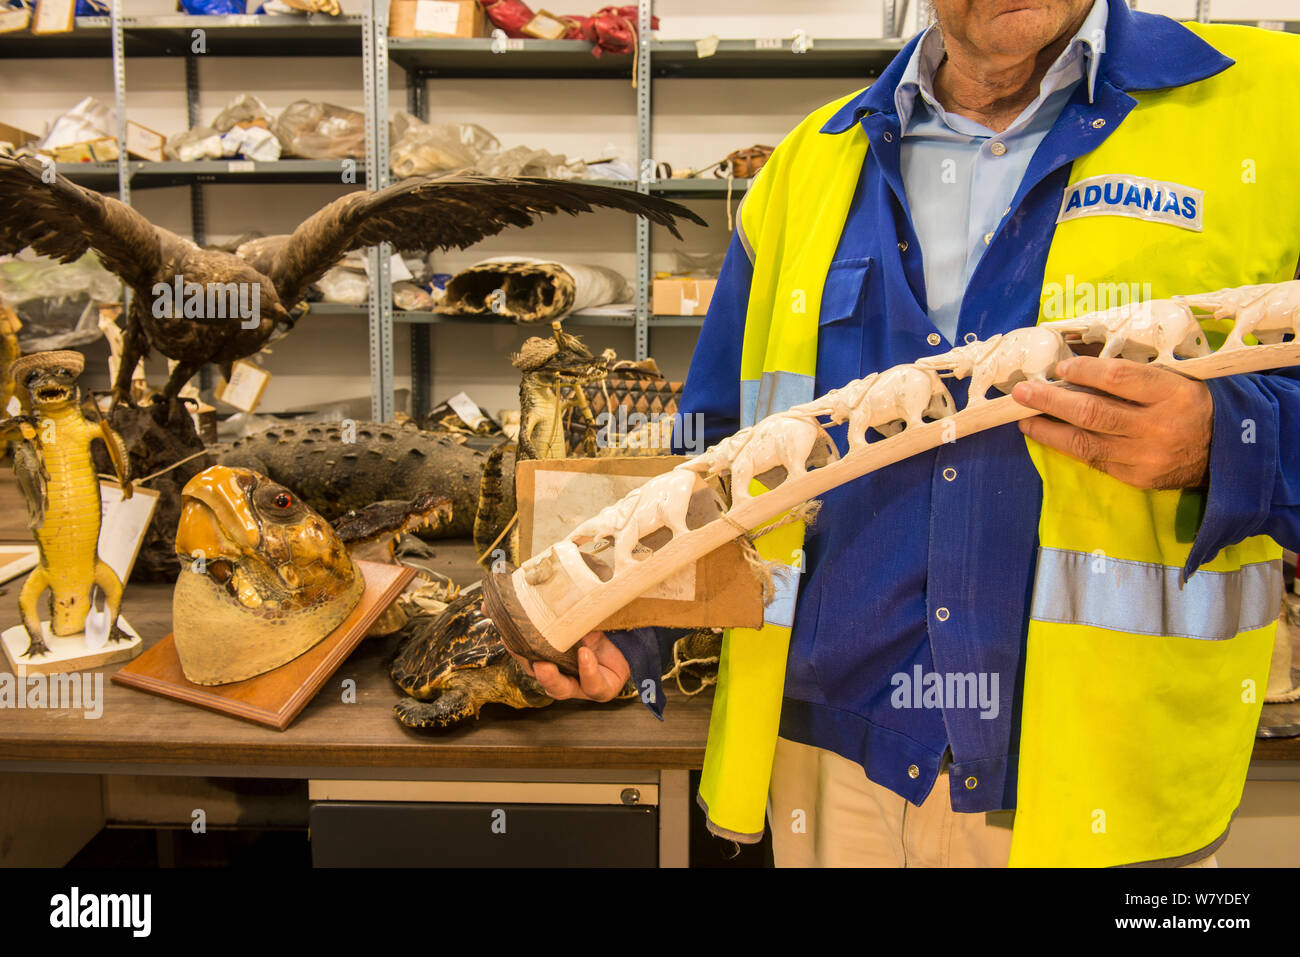 Man with carved ivory tusk, taxidermy specimens and endangered wildlife products confiscated by the Spanish police at Adolfo Suarez Madrid-Barajas Airport in accordance with CITES, stored in a government warehouse, Spain, October 2014. Stock Photo